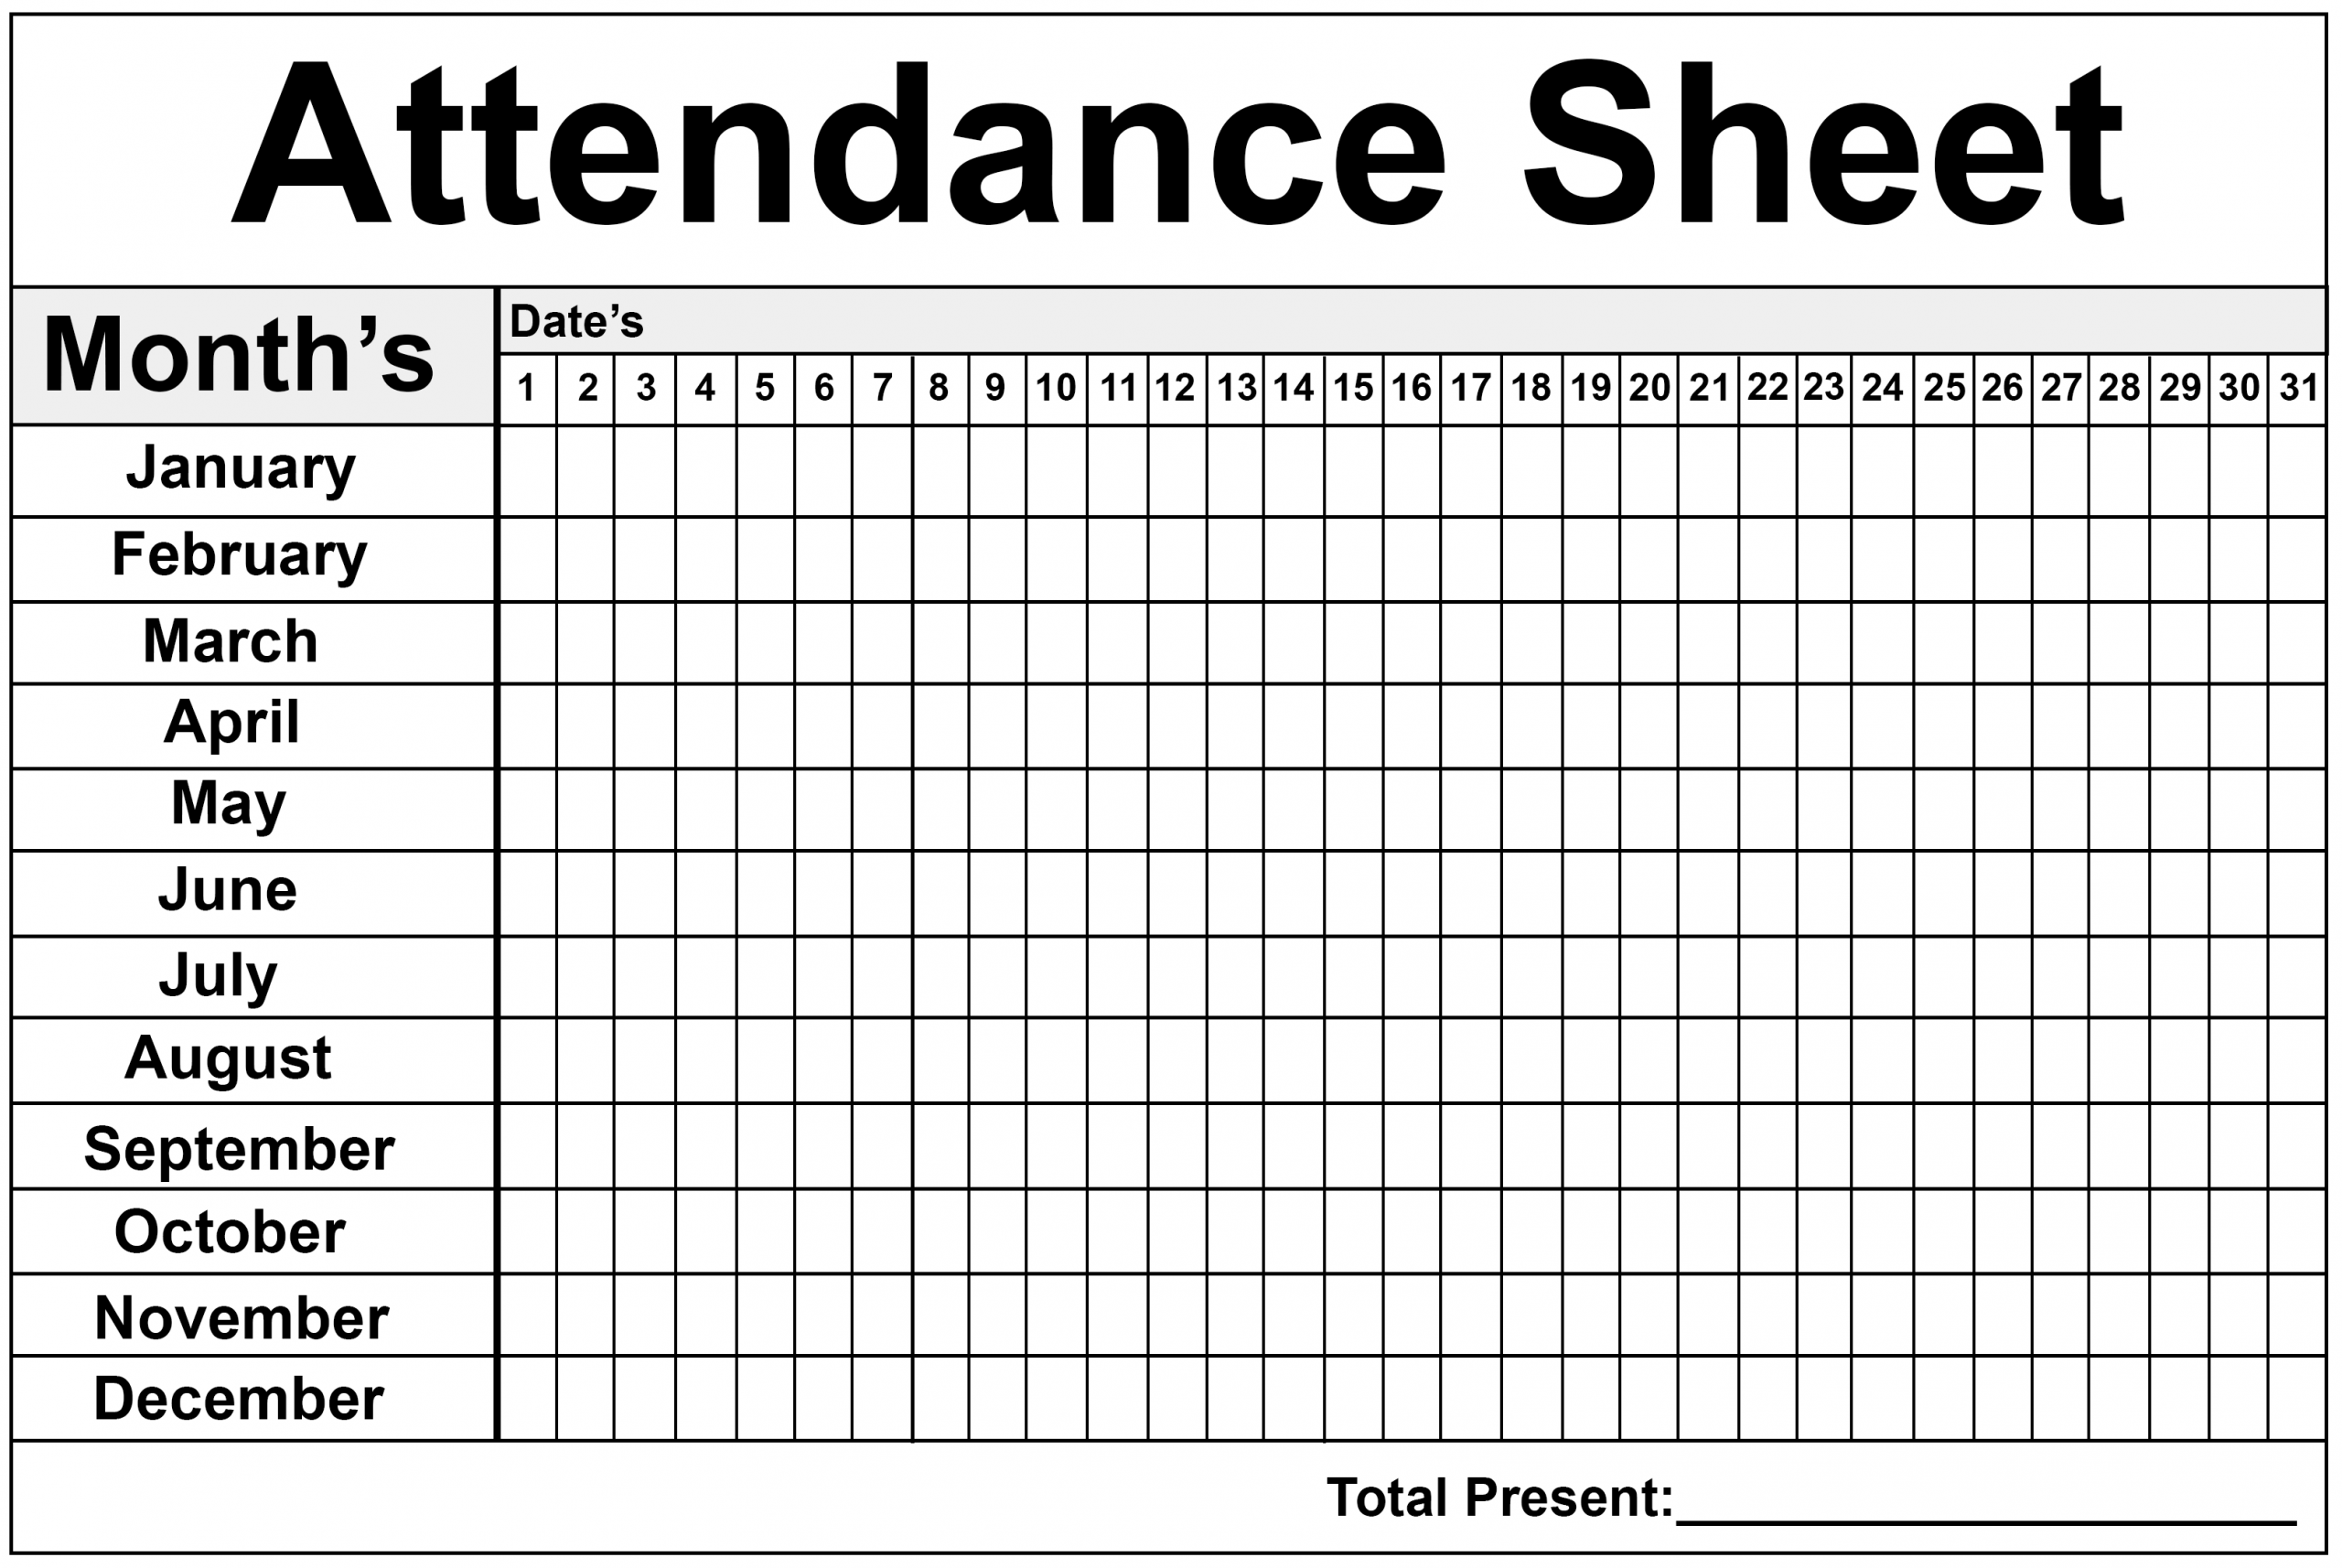 Daily/Monthly Employee Attendance Sheet Template Free | How-Free Attendance Sheet Pdf 2021